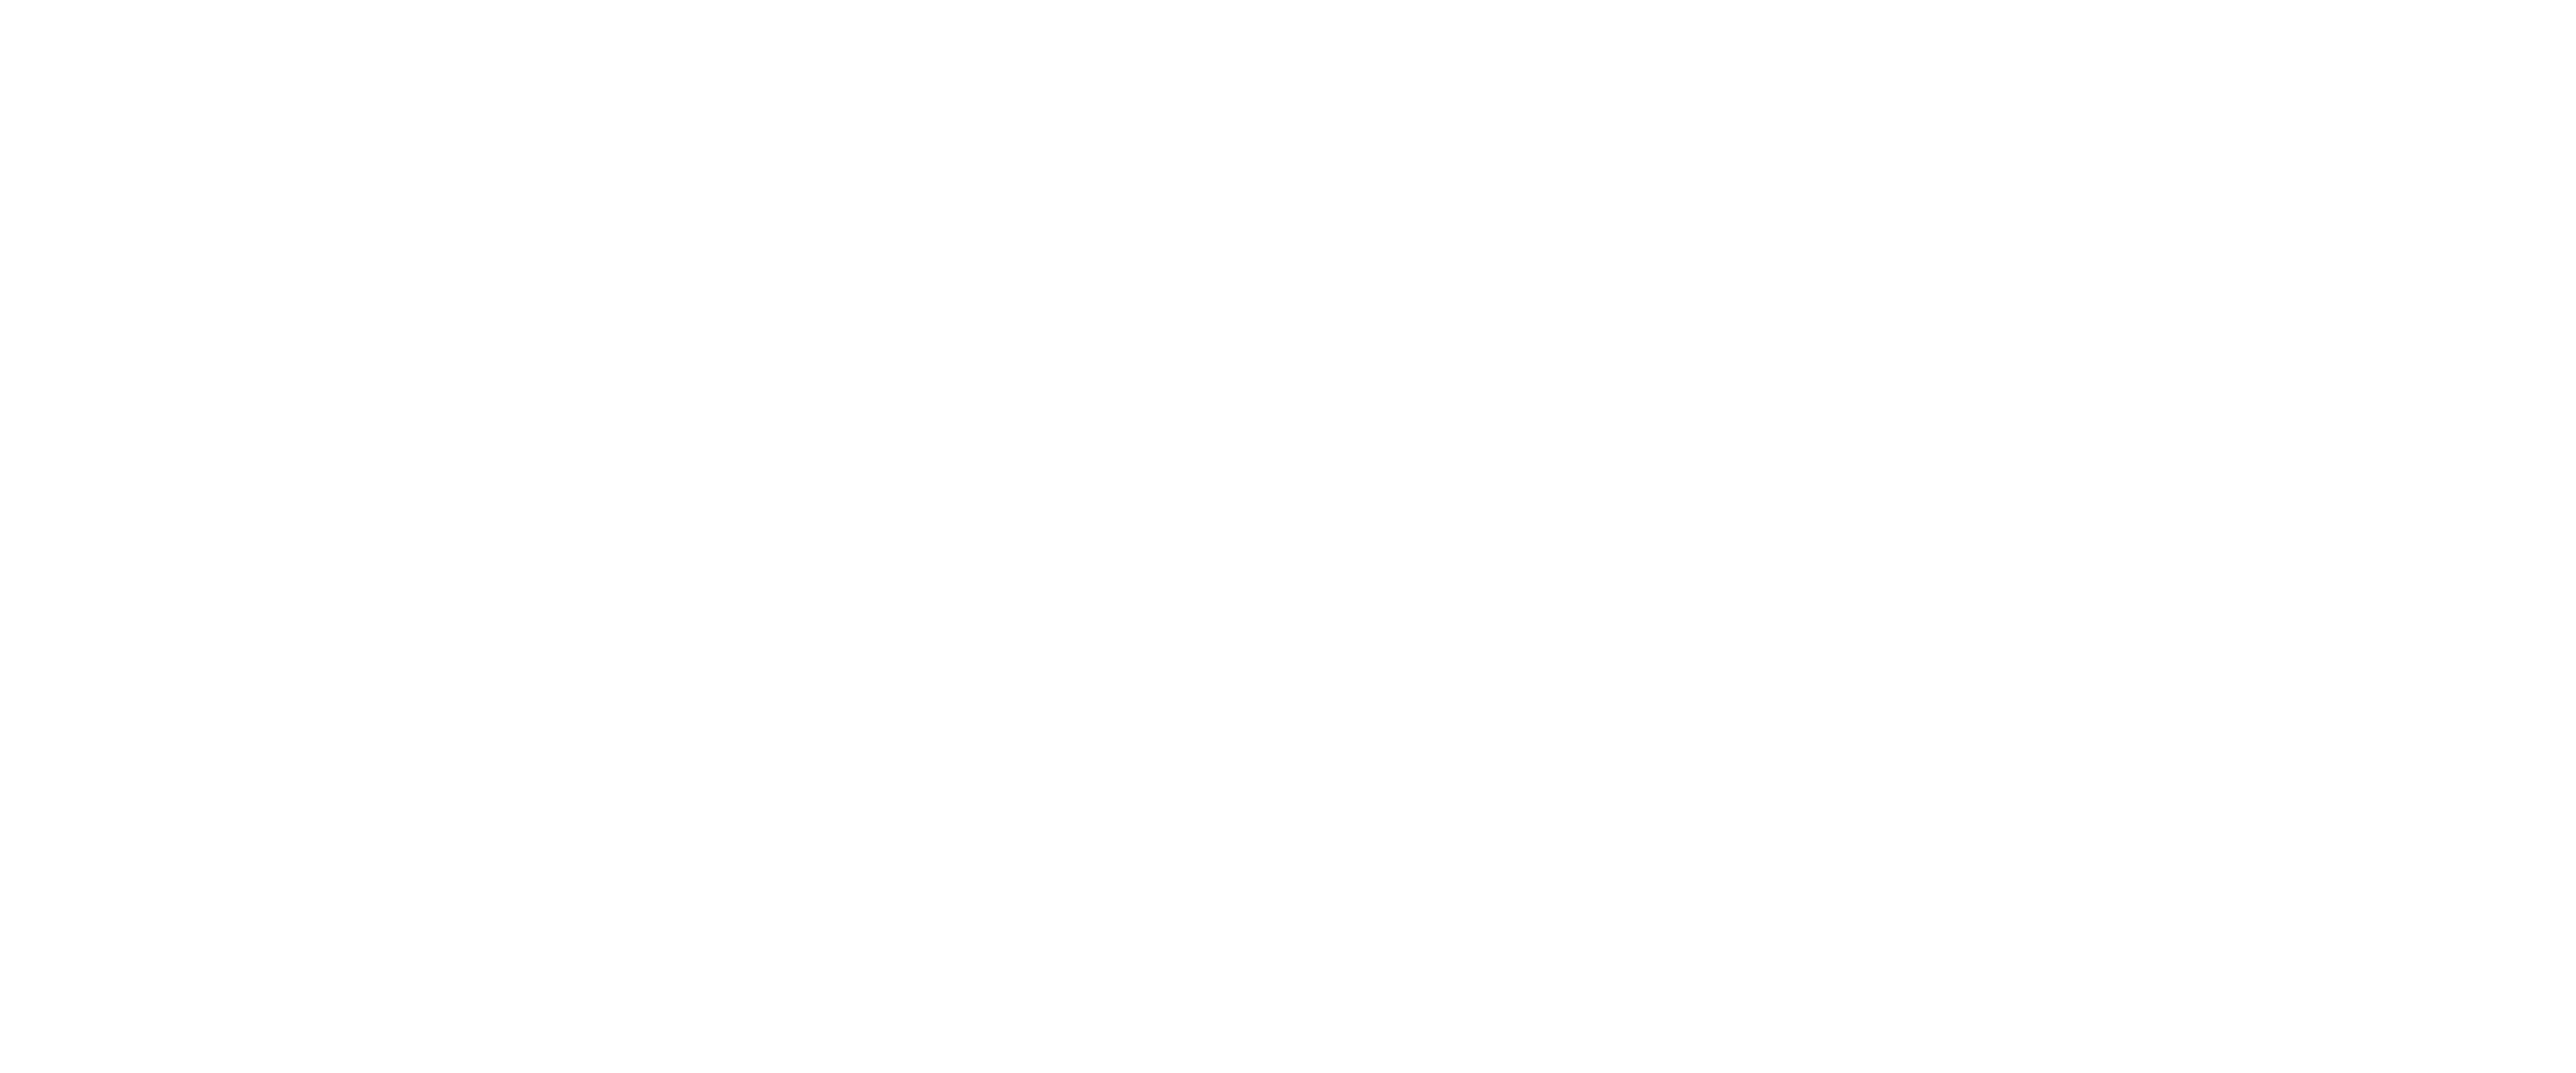 1800 Logo - HD Anno 1800 Logo Png , Free Unlimited Download #12263 - Sccpre.cat